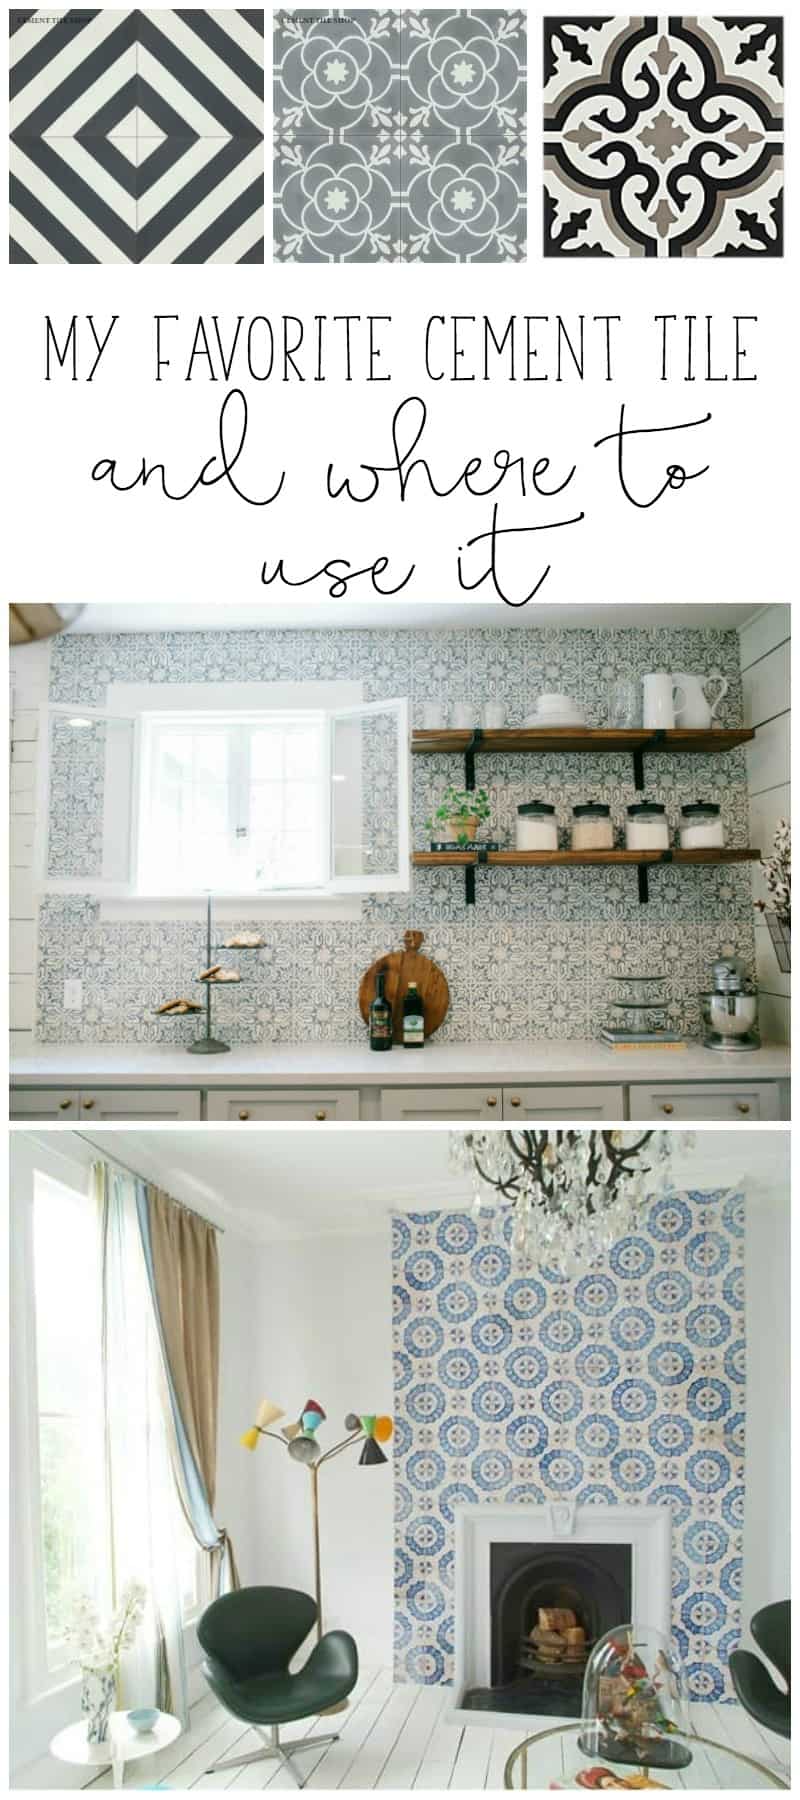 Get inspired with these cement tiles ideas for your bathroom, fireplace and kitchen backsplash.